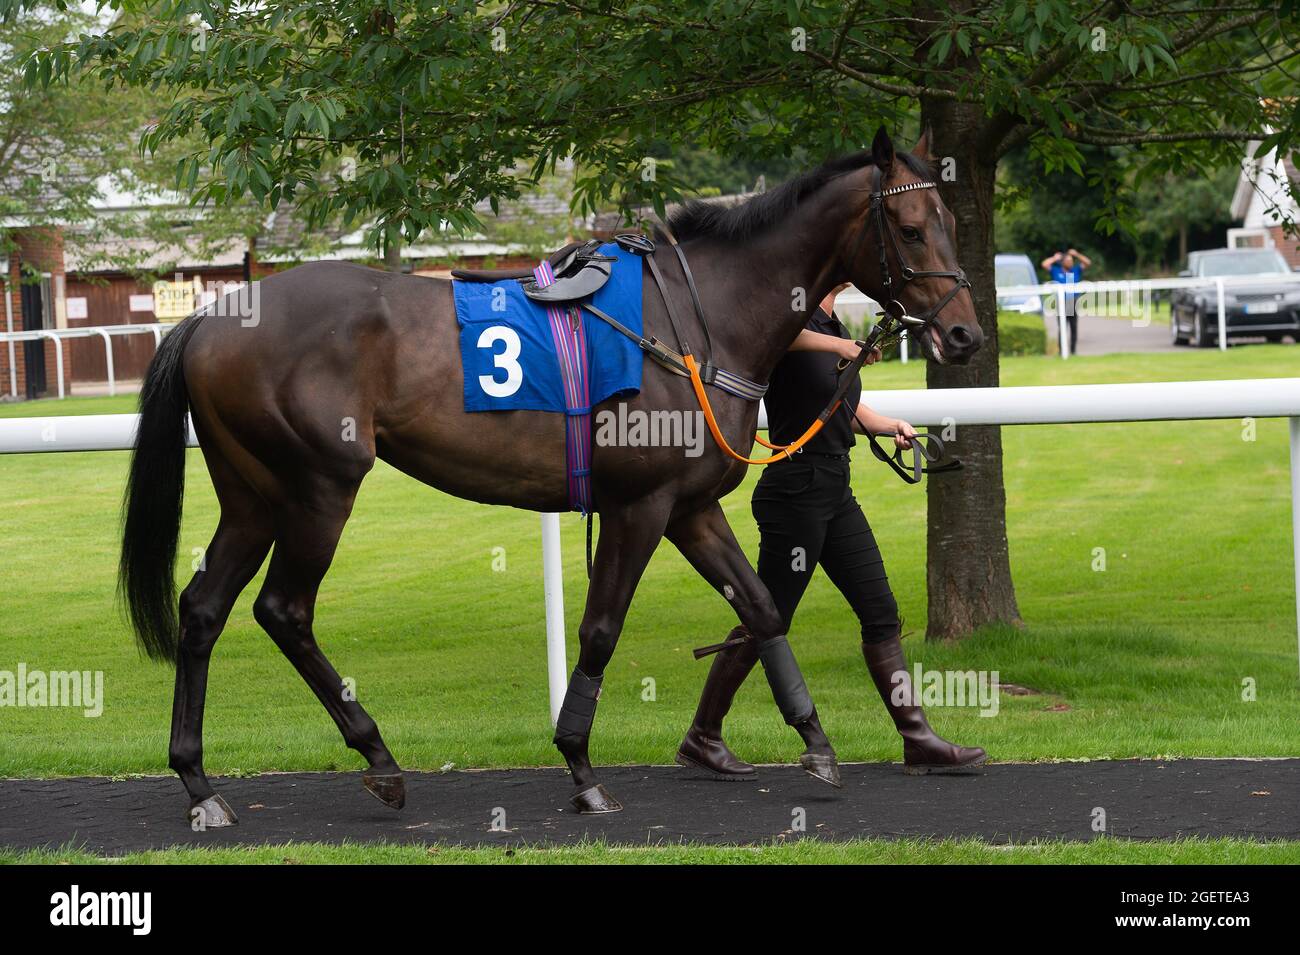 Sunbury-on-Thames, Middlesex, Uk. 20th August, 2021. Dashing Spirit in the  Pre Parade Ring before riding in the Unibet New Instant Roulette Novice  Stakes (Class 5). Credit: Maureen McLean/Alamy Stock Photo - Alamy